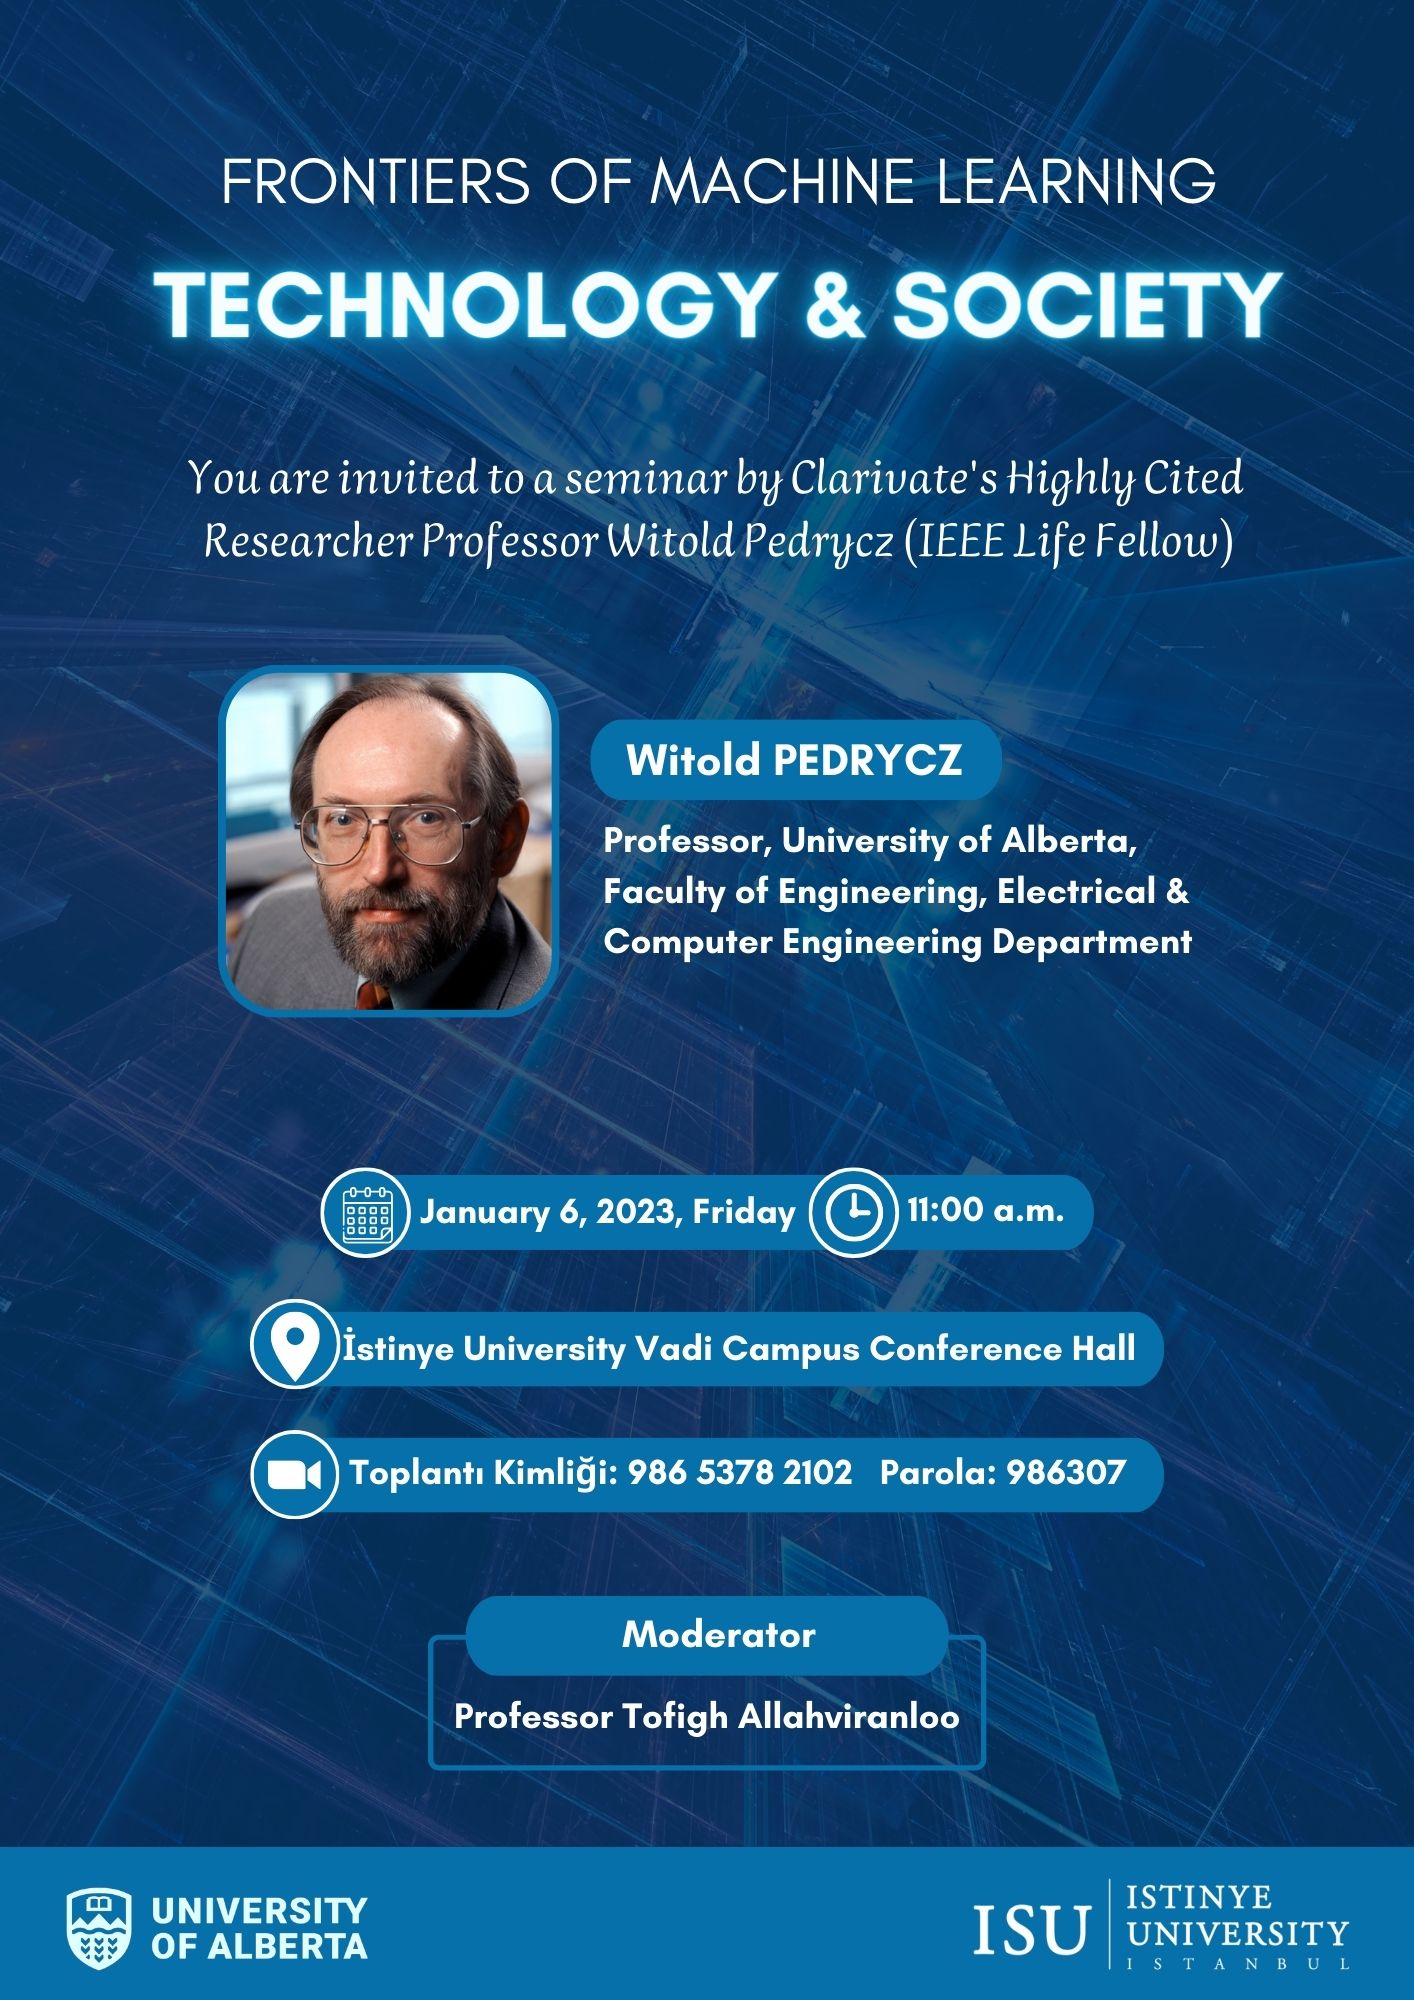 Frontiers of Machine Learning "Technology & Society"